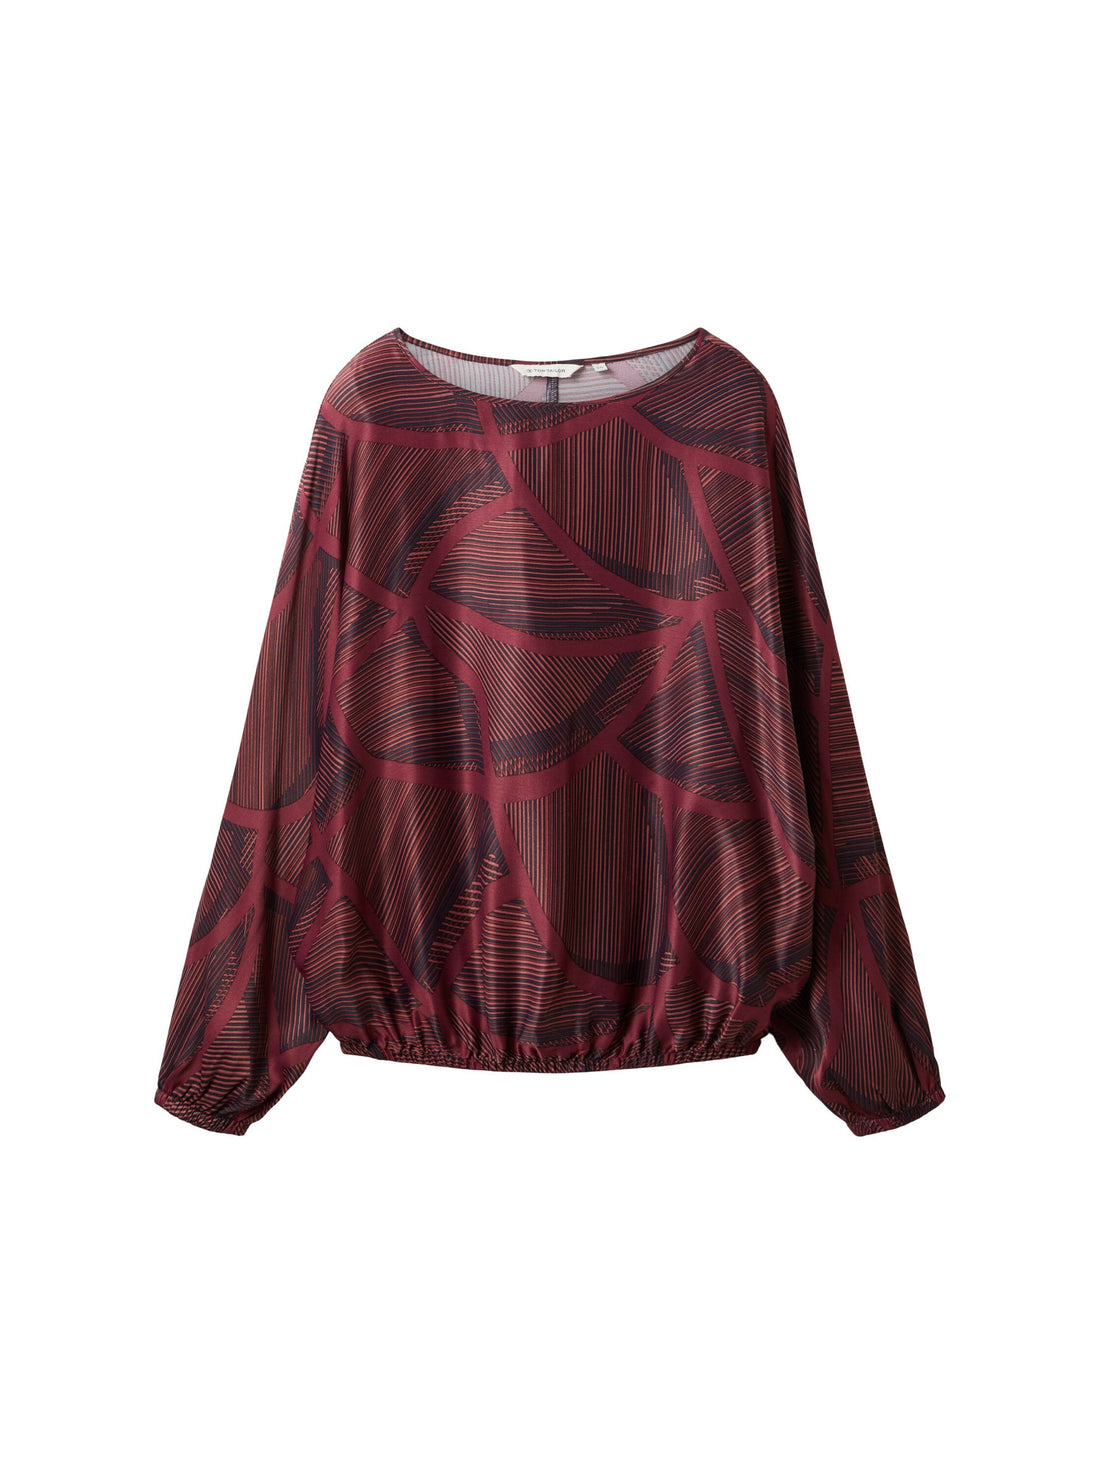 Printed Blouse With Balloon Sleeves_1037896_32363_01